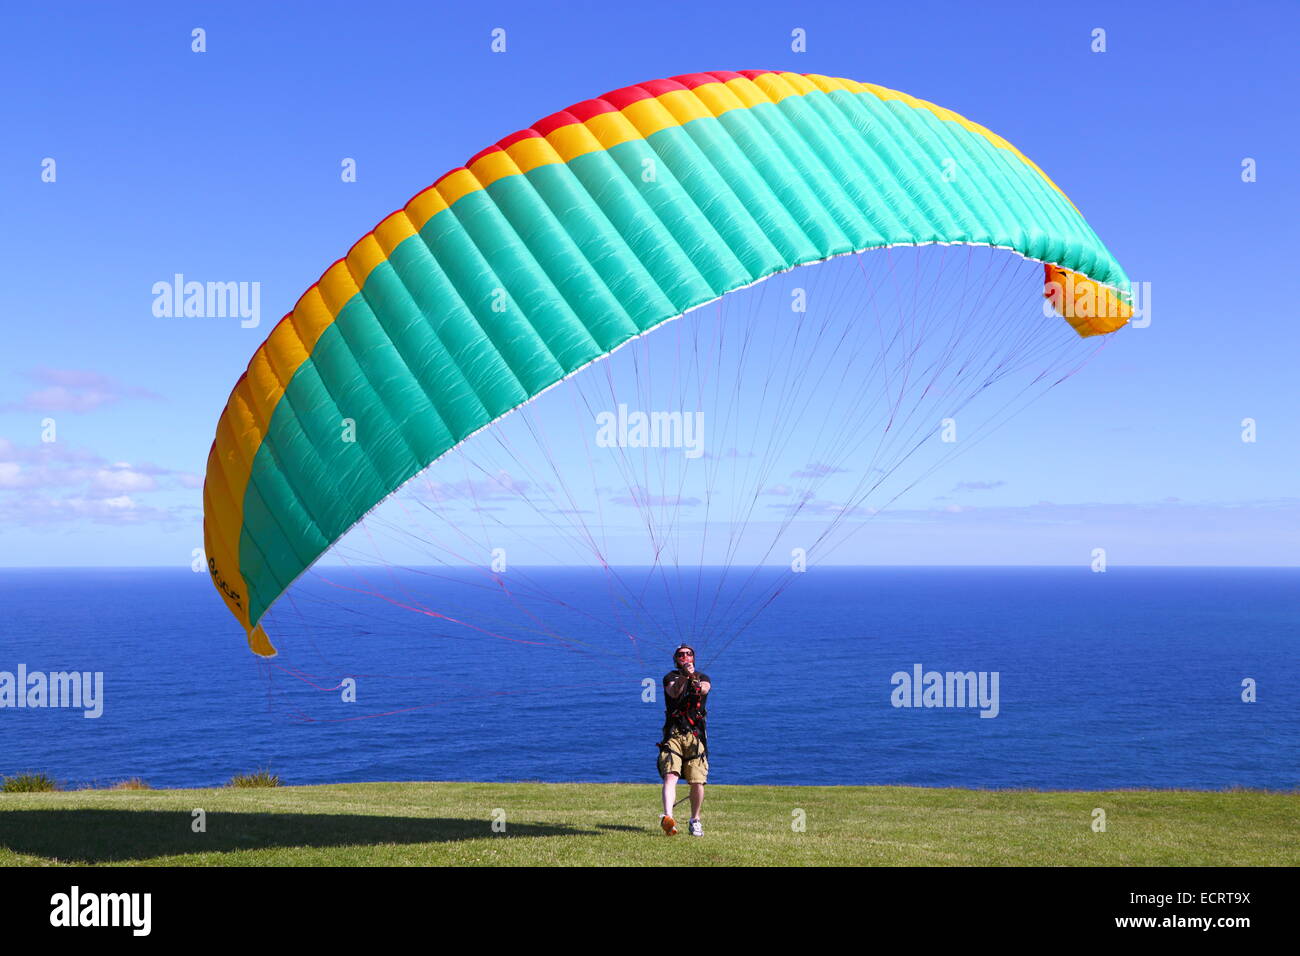 A man prepares his paraglider to lift off and soar over the Pacific Ocean off Bald Hill, New South Wales, Australia. Stock Photo